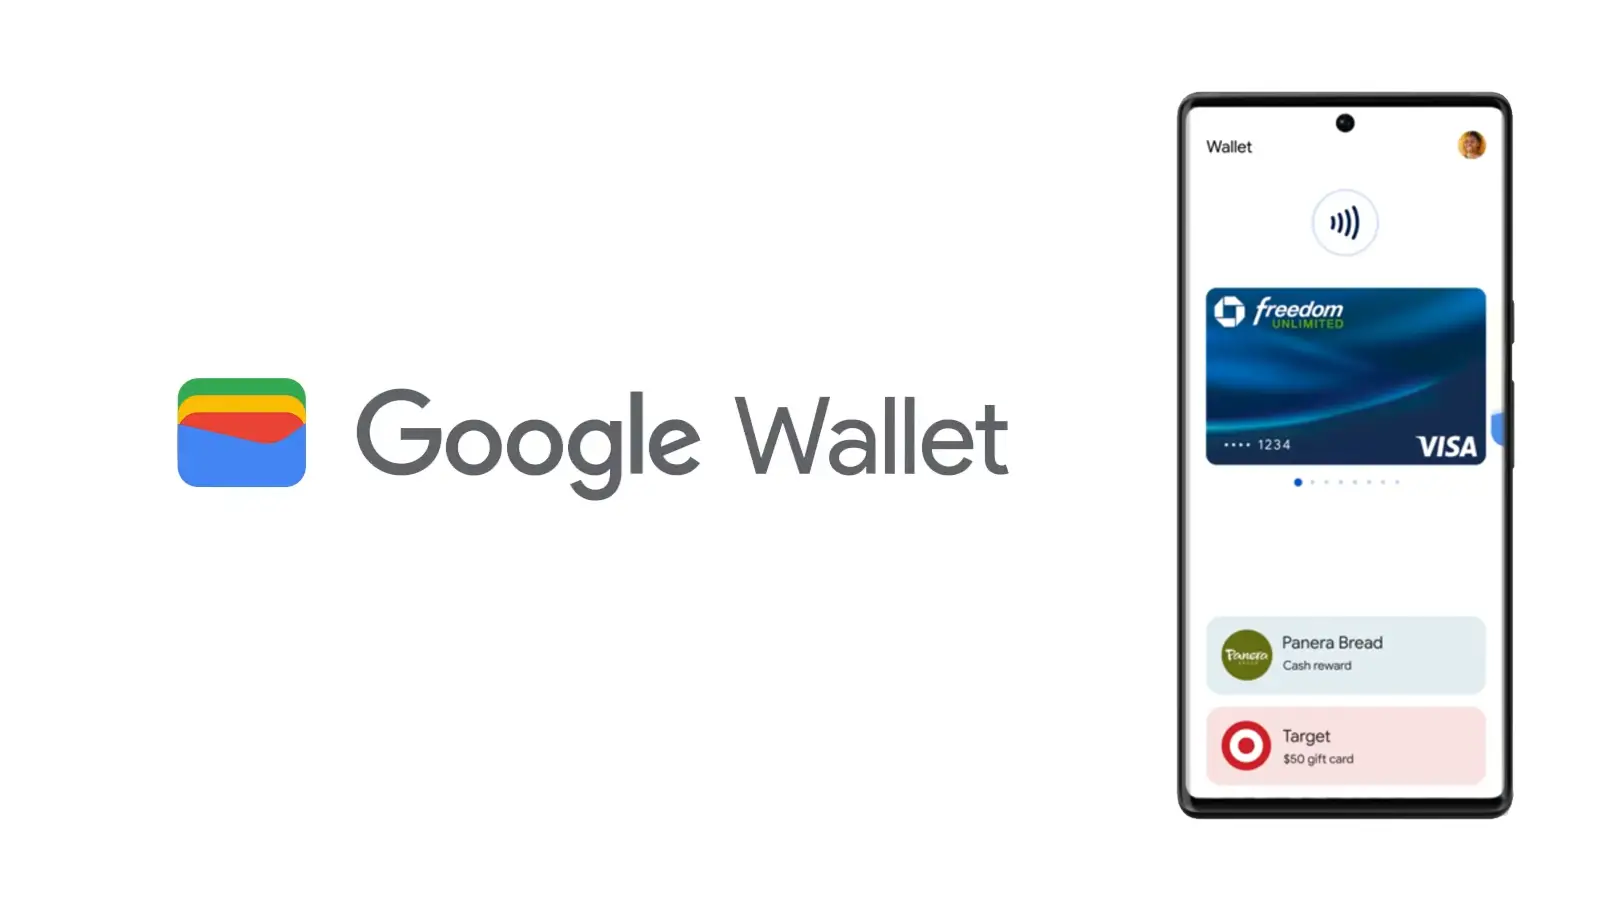 Apple Wallet and Google Wallet